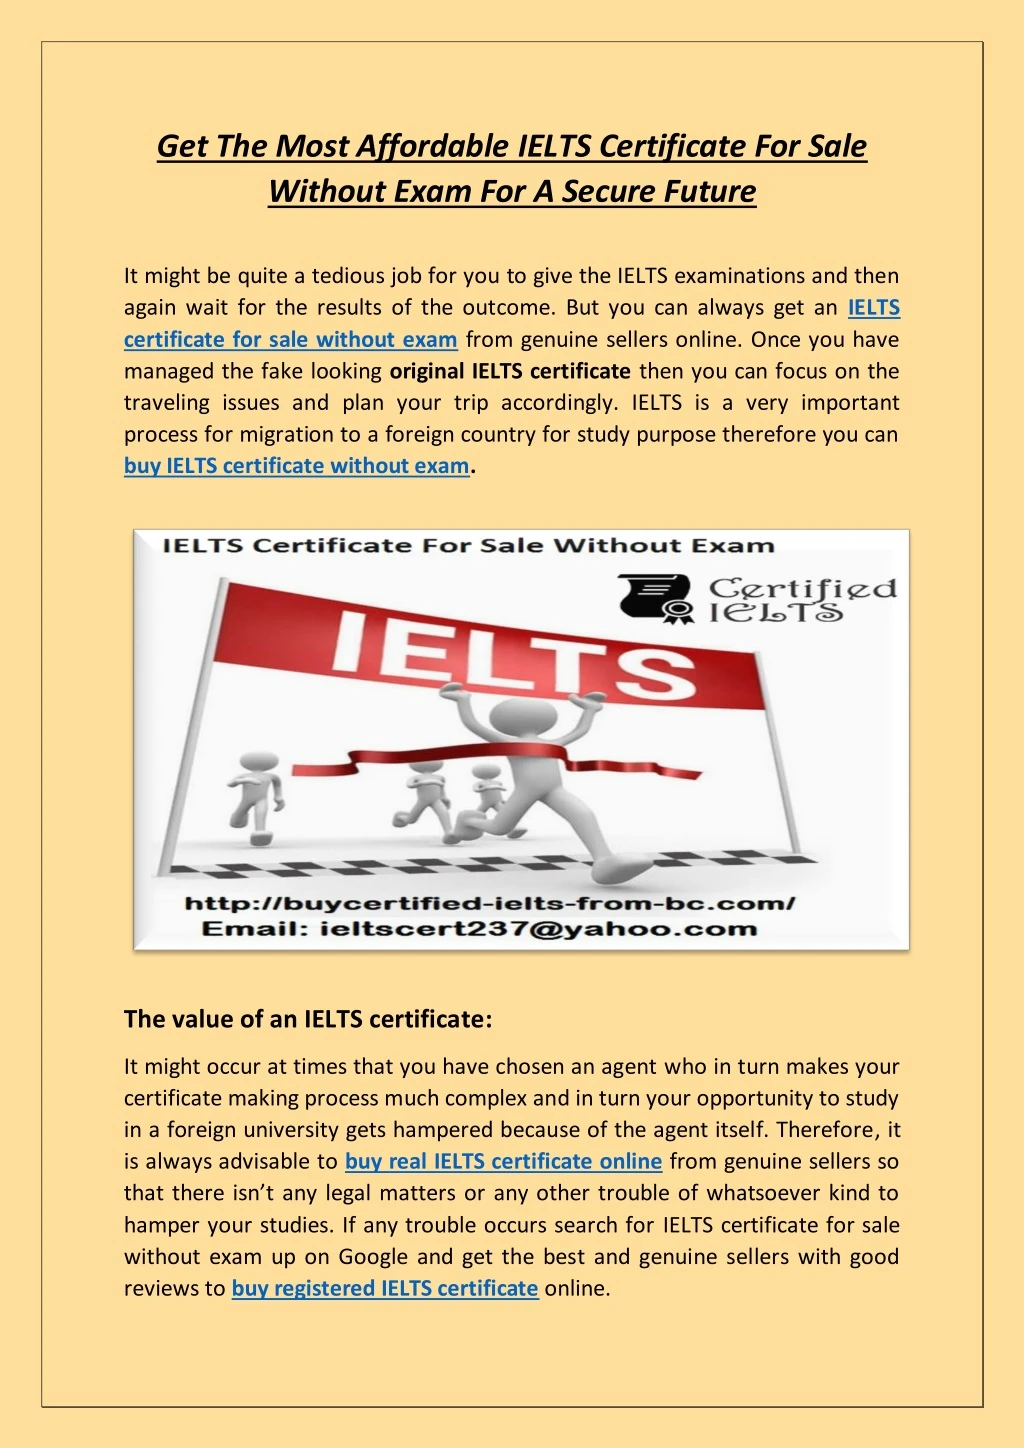 get the most affordable ielts certificate